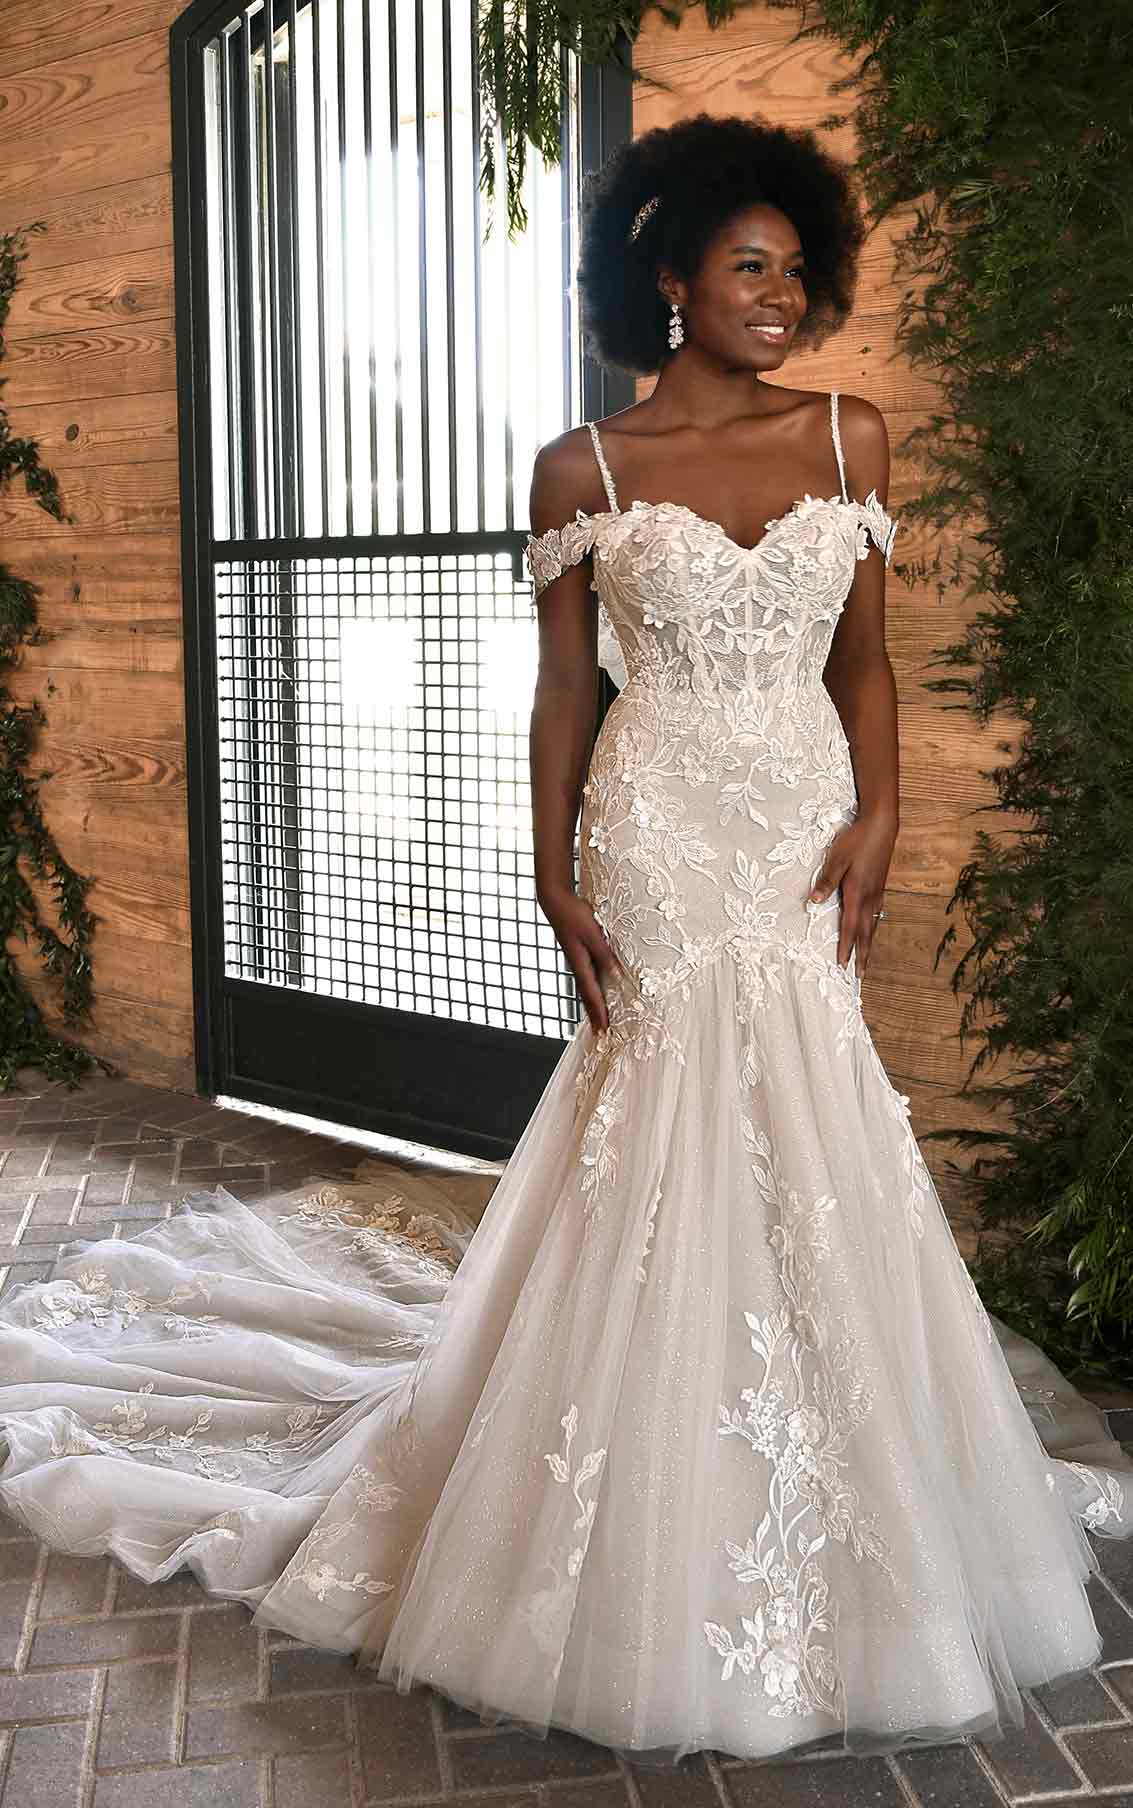 Lace fit-and-flare wedding dress